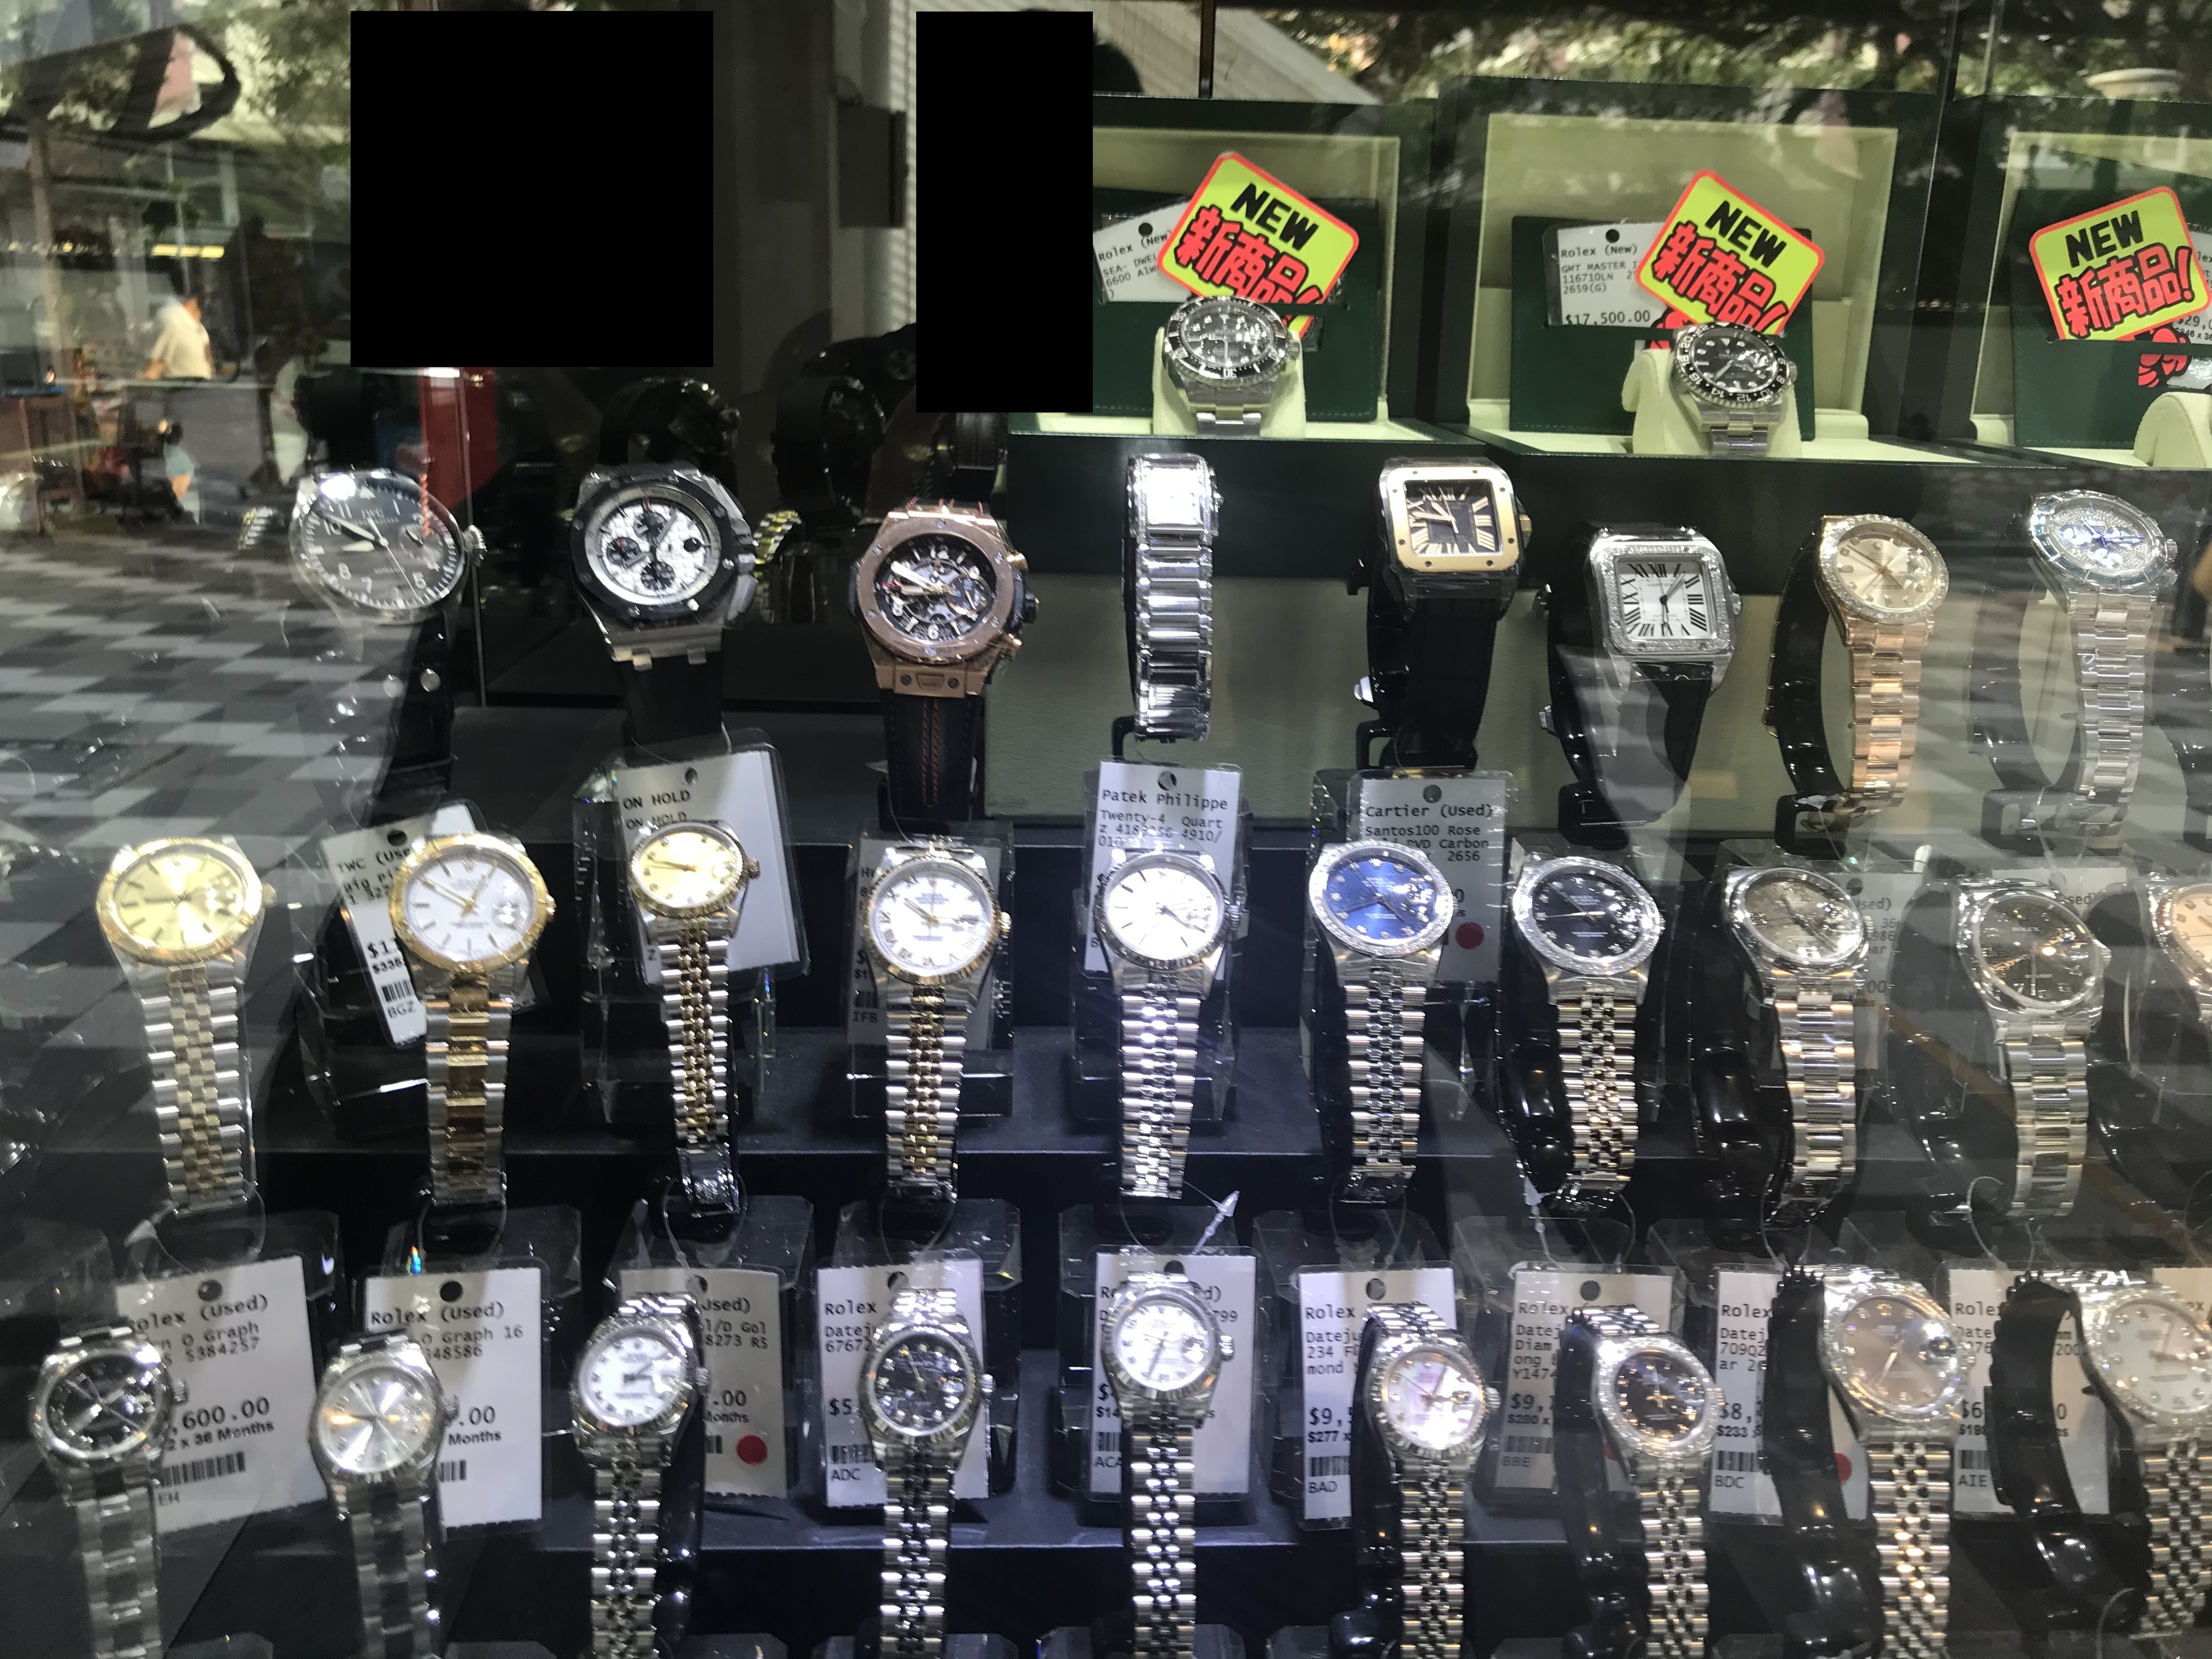 Shop in Bedok sells new and pre-owned Rolex watches from $2.8K - 2